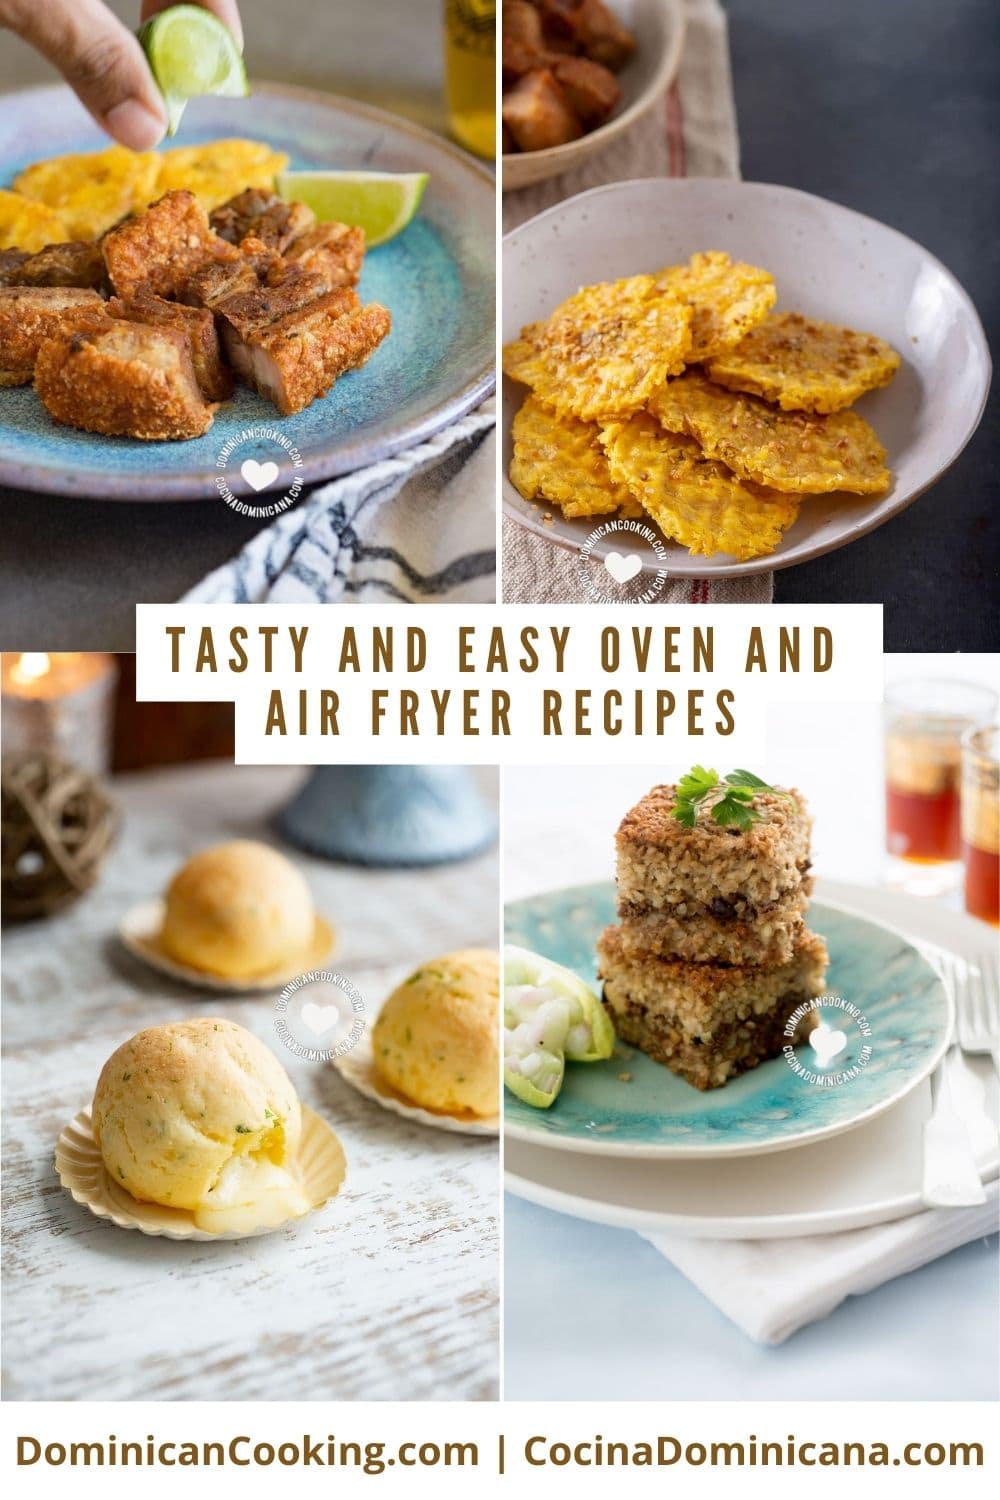 Oven and air fryer recipes.